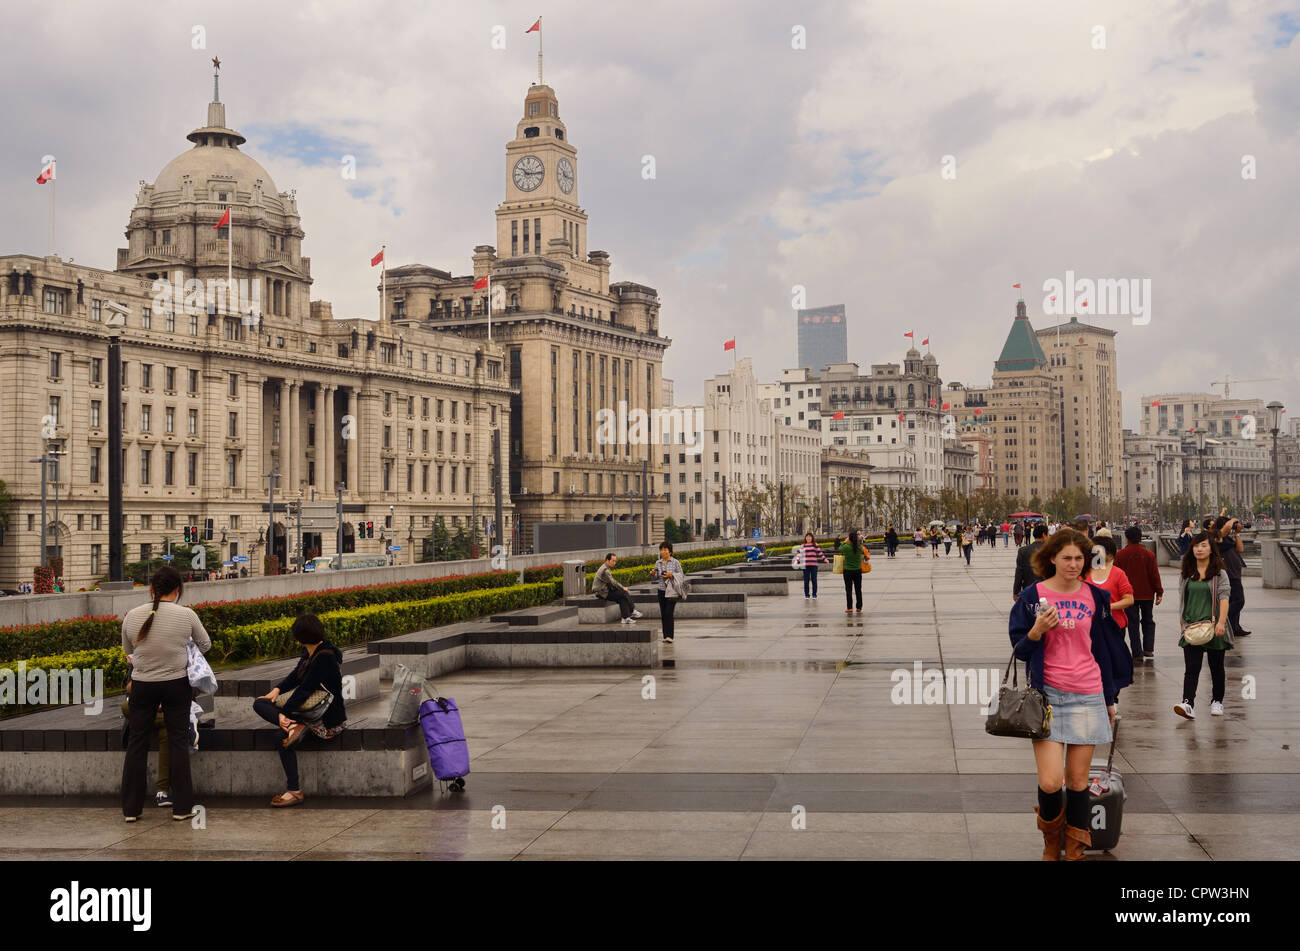 Tourists walking on a wet Bund promenade after a rainstorm with old buildings in Shanghai Peoples Republic of China Stock Photo